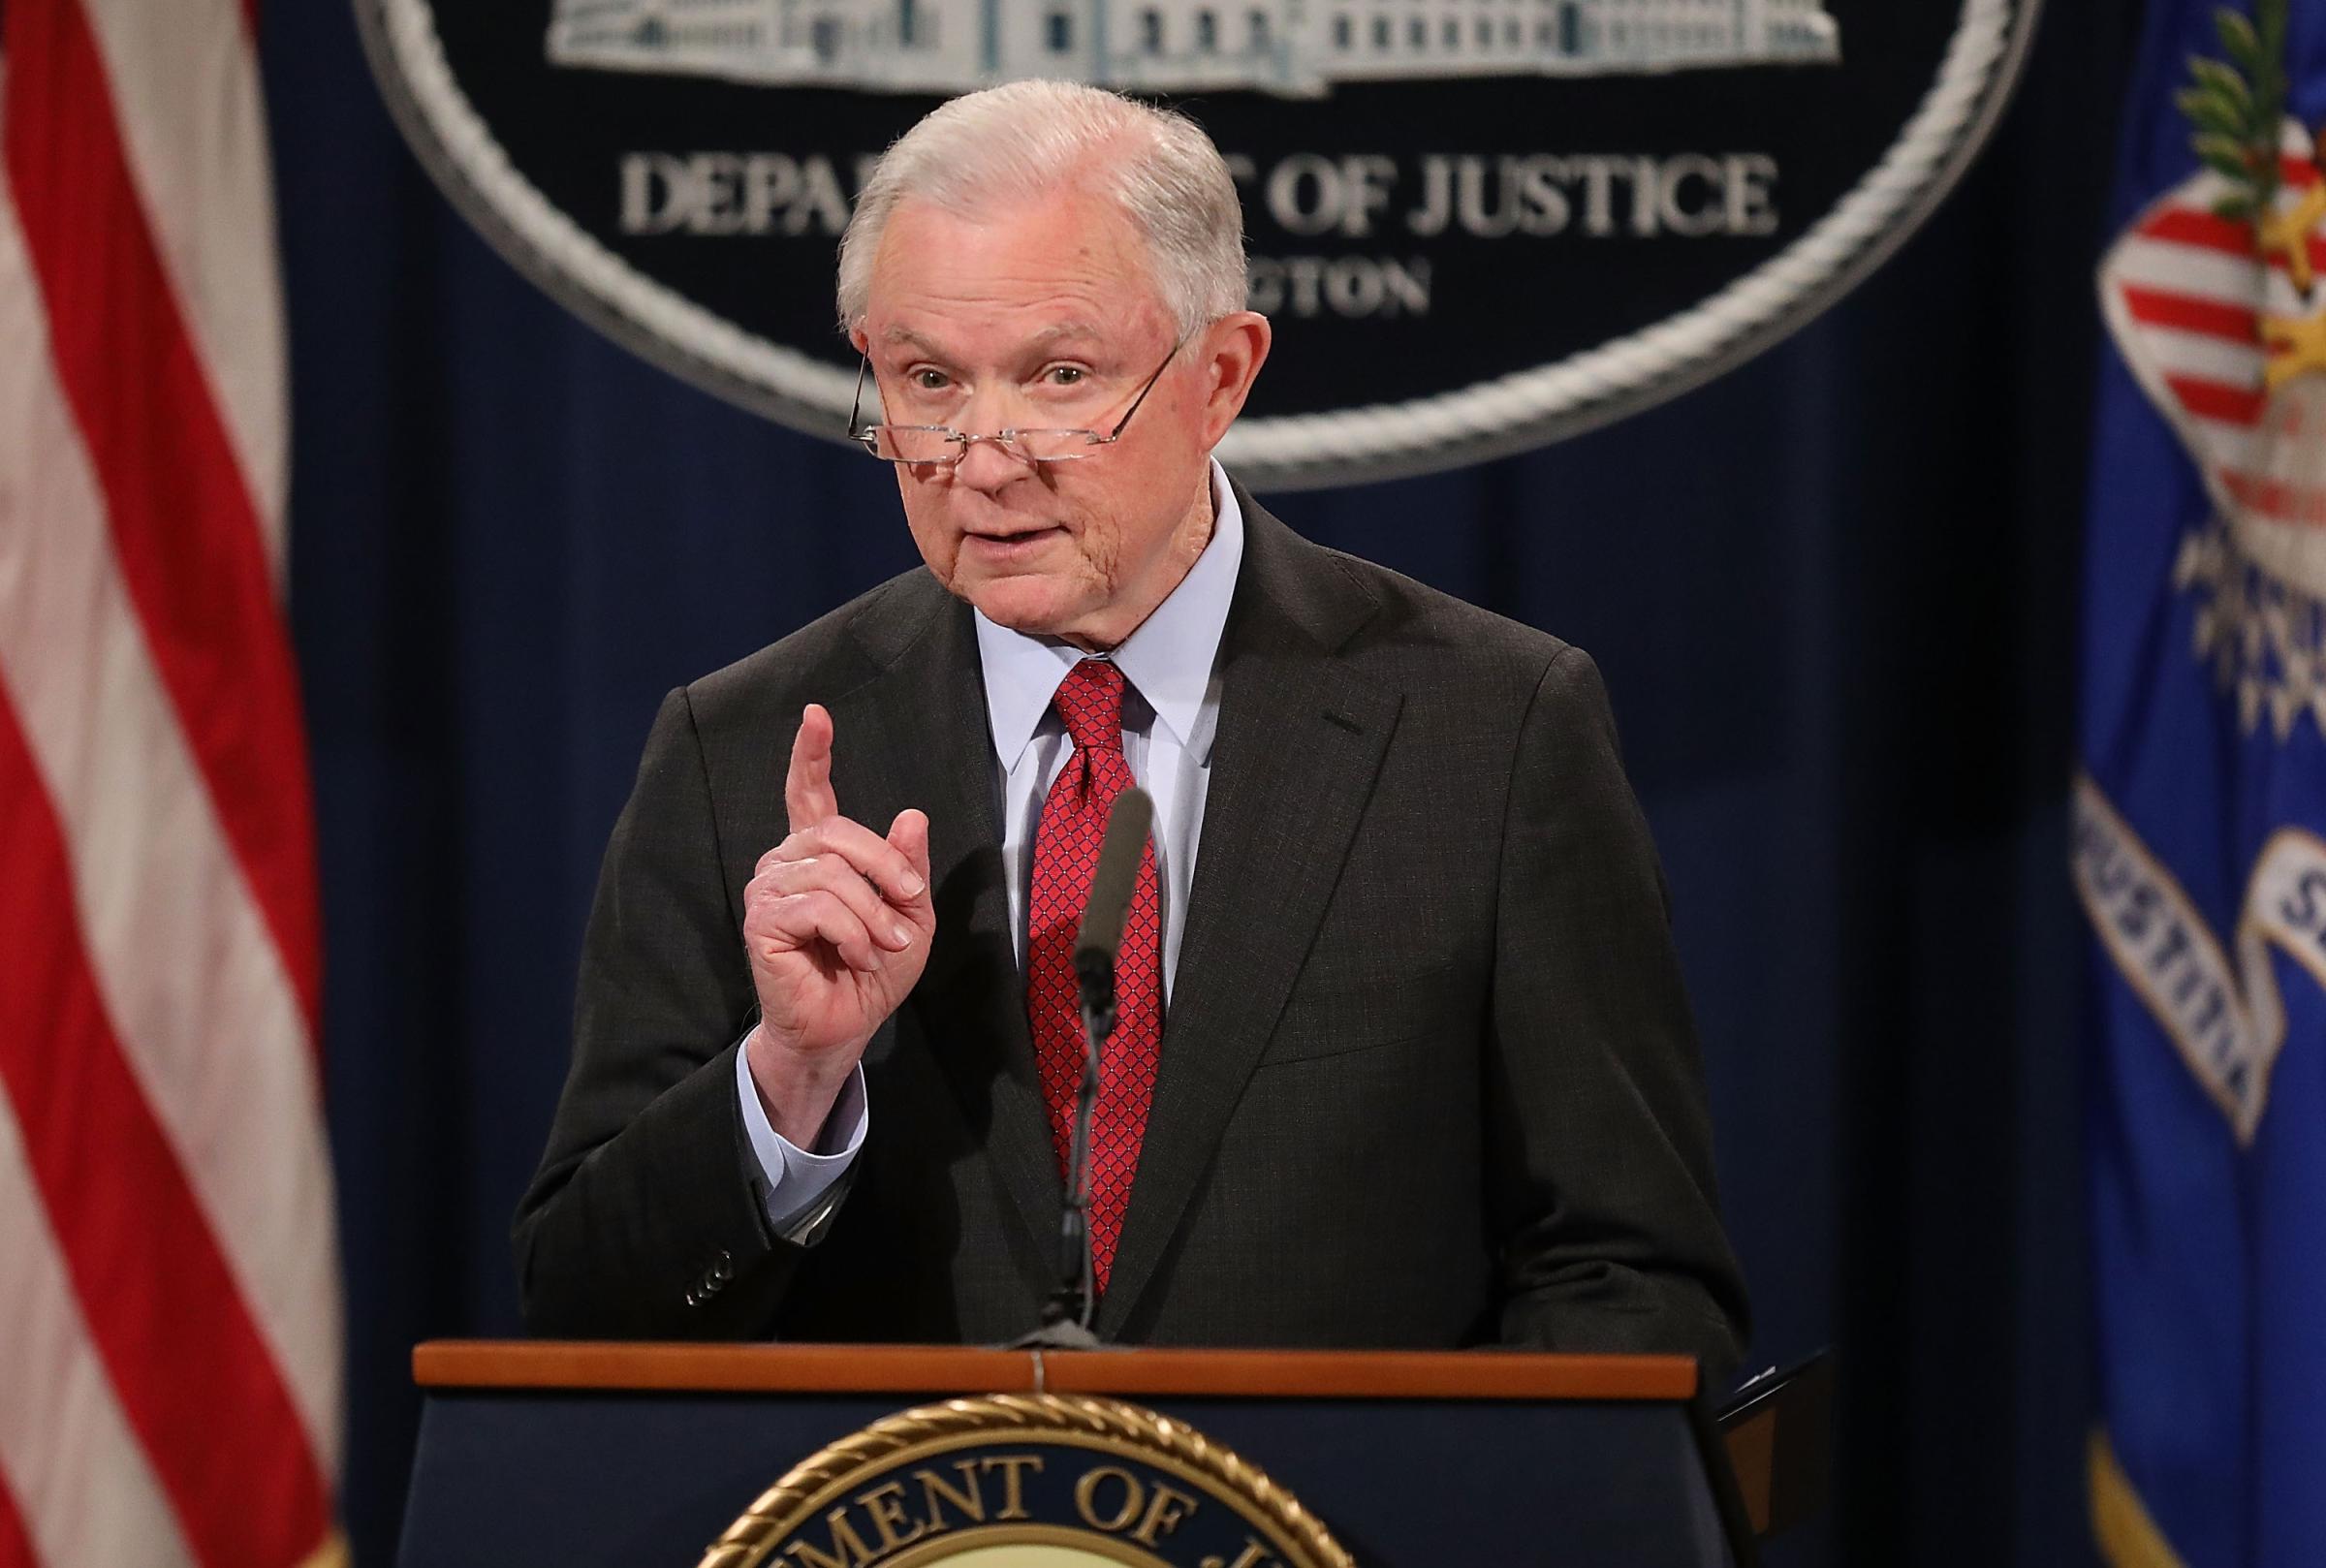 Attorney General Jeff Sessions Holds News Conference Discussing Efforts To Reduce Violent Crime